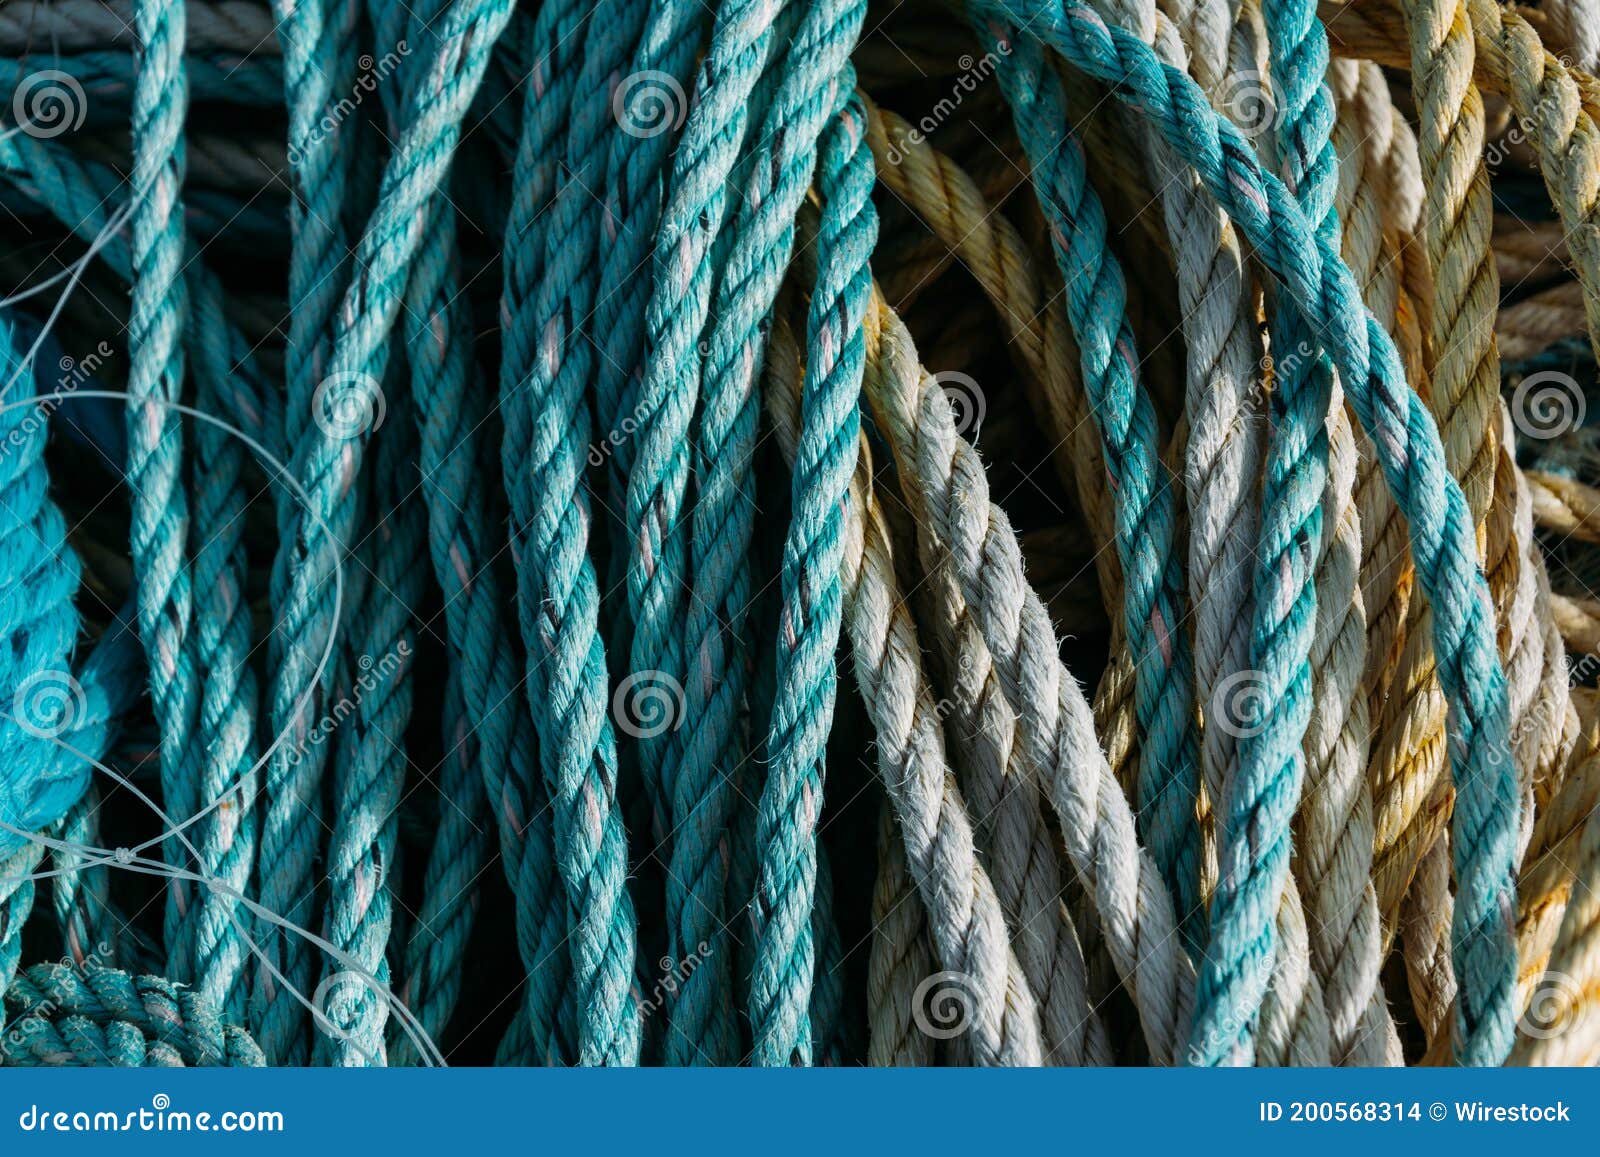 Closeup of Old Fishing Ropes and Nets Under the Sunlight Stock